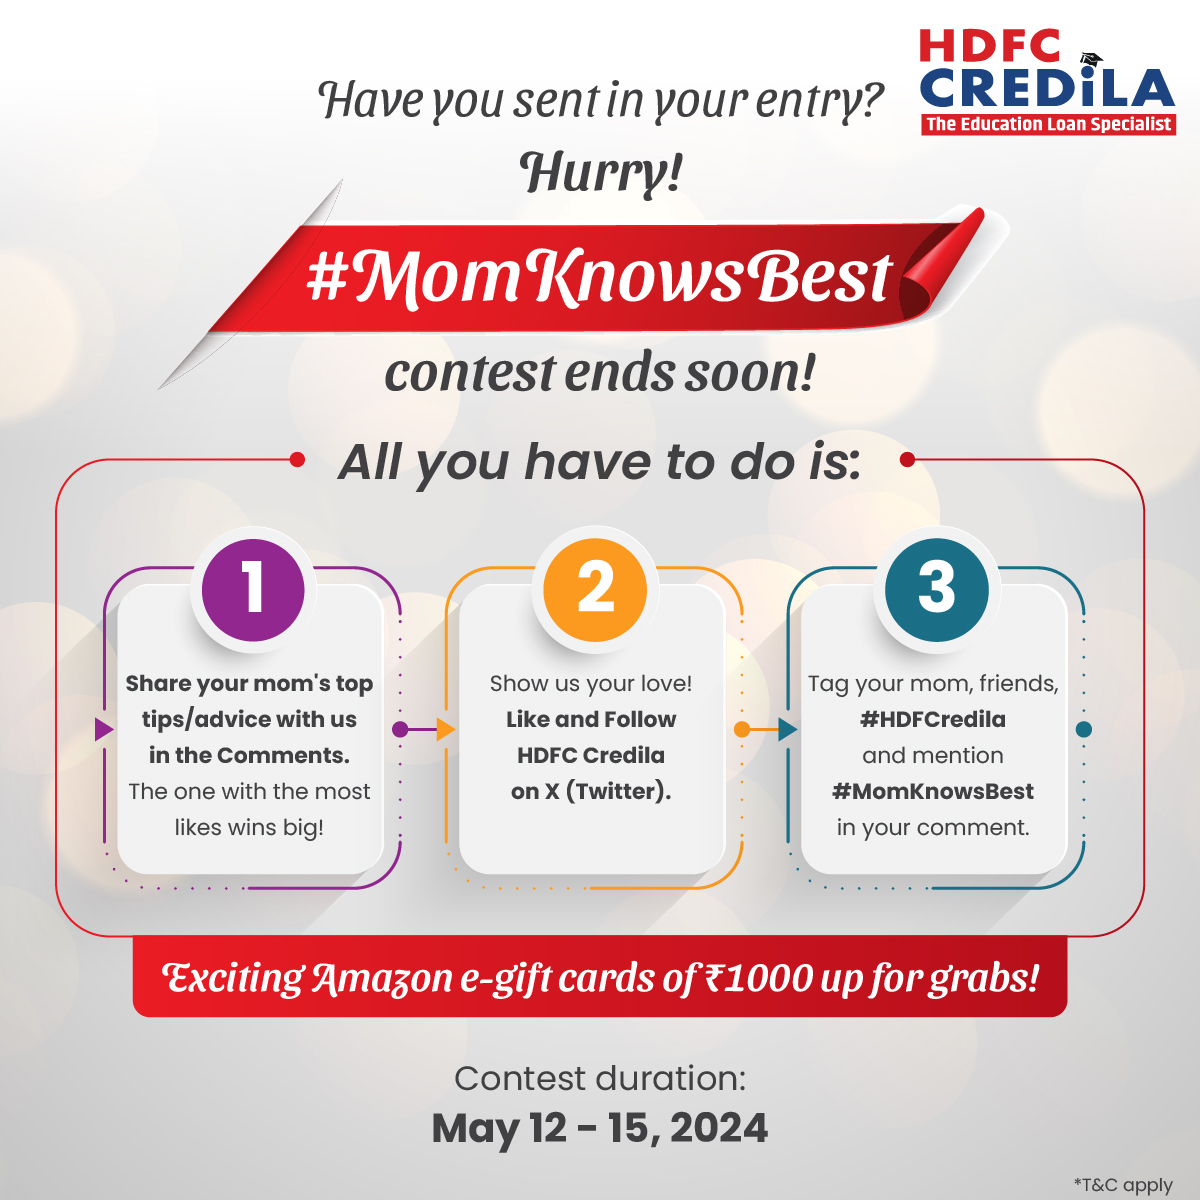 If you've not sent in your contest entry, now is the time to do so! Exciting prizes to be won! *T&C apply bit.ly/3wwkmKv #HDFCCredila #HDFCCredilaContest #MomKnowsBest #Contest #Tips #Advice #comment #ContestAlert #ContestTime #GiveAway #GiveAwayAlert #ContestGiveAway